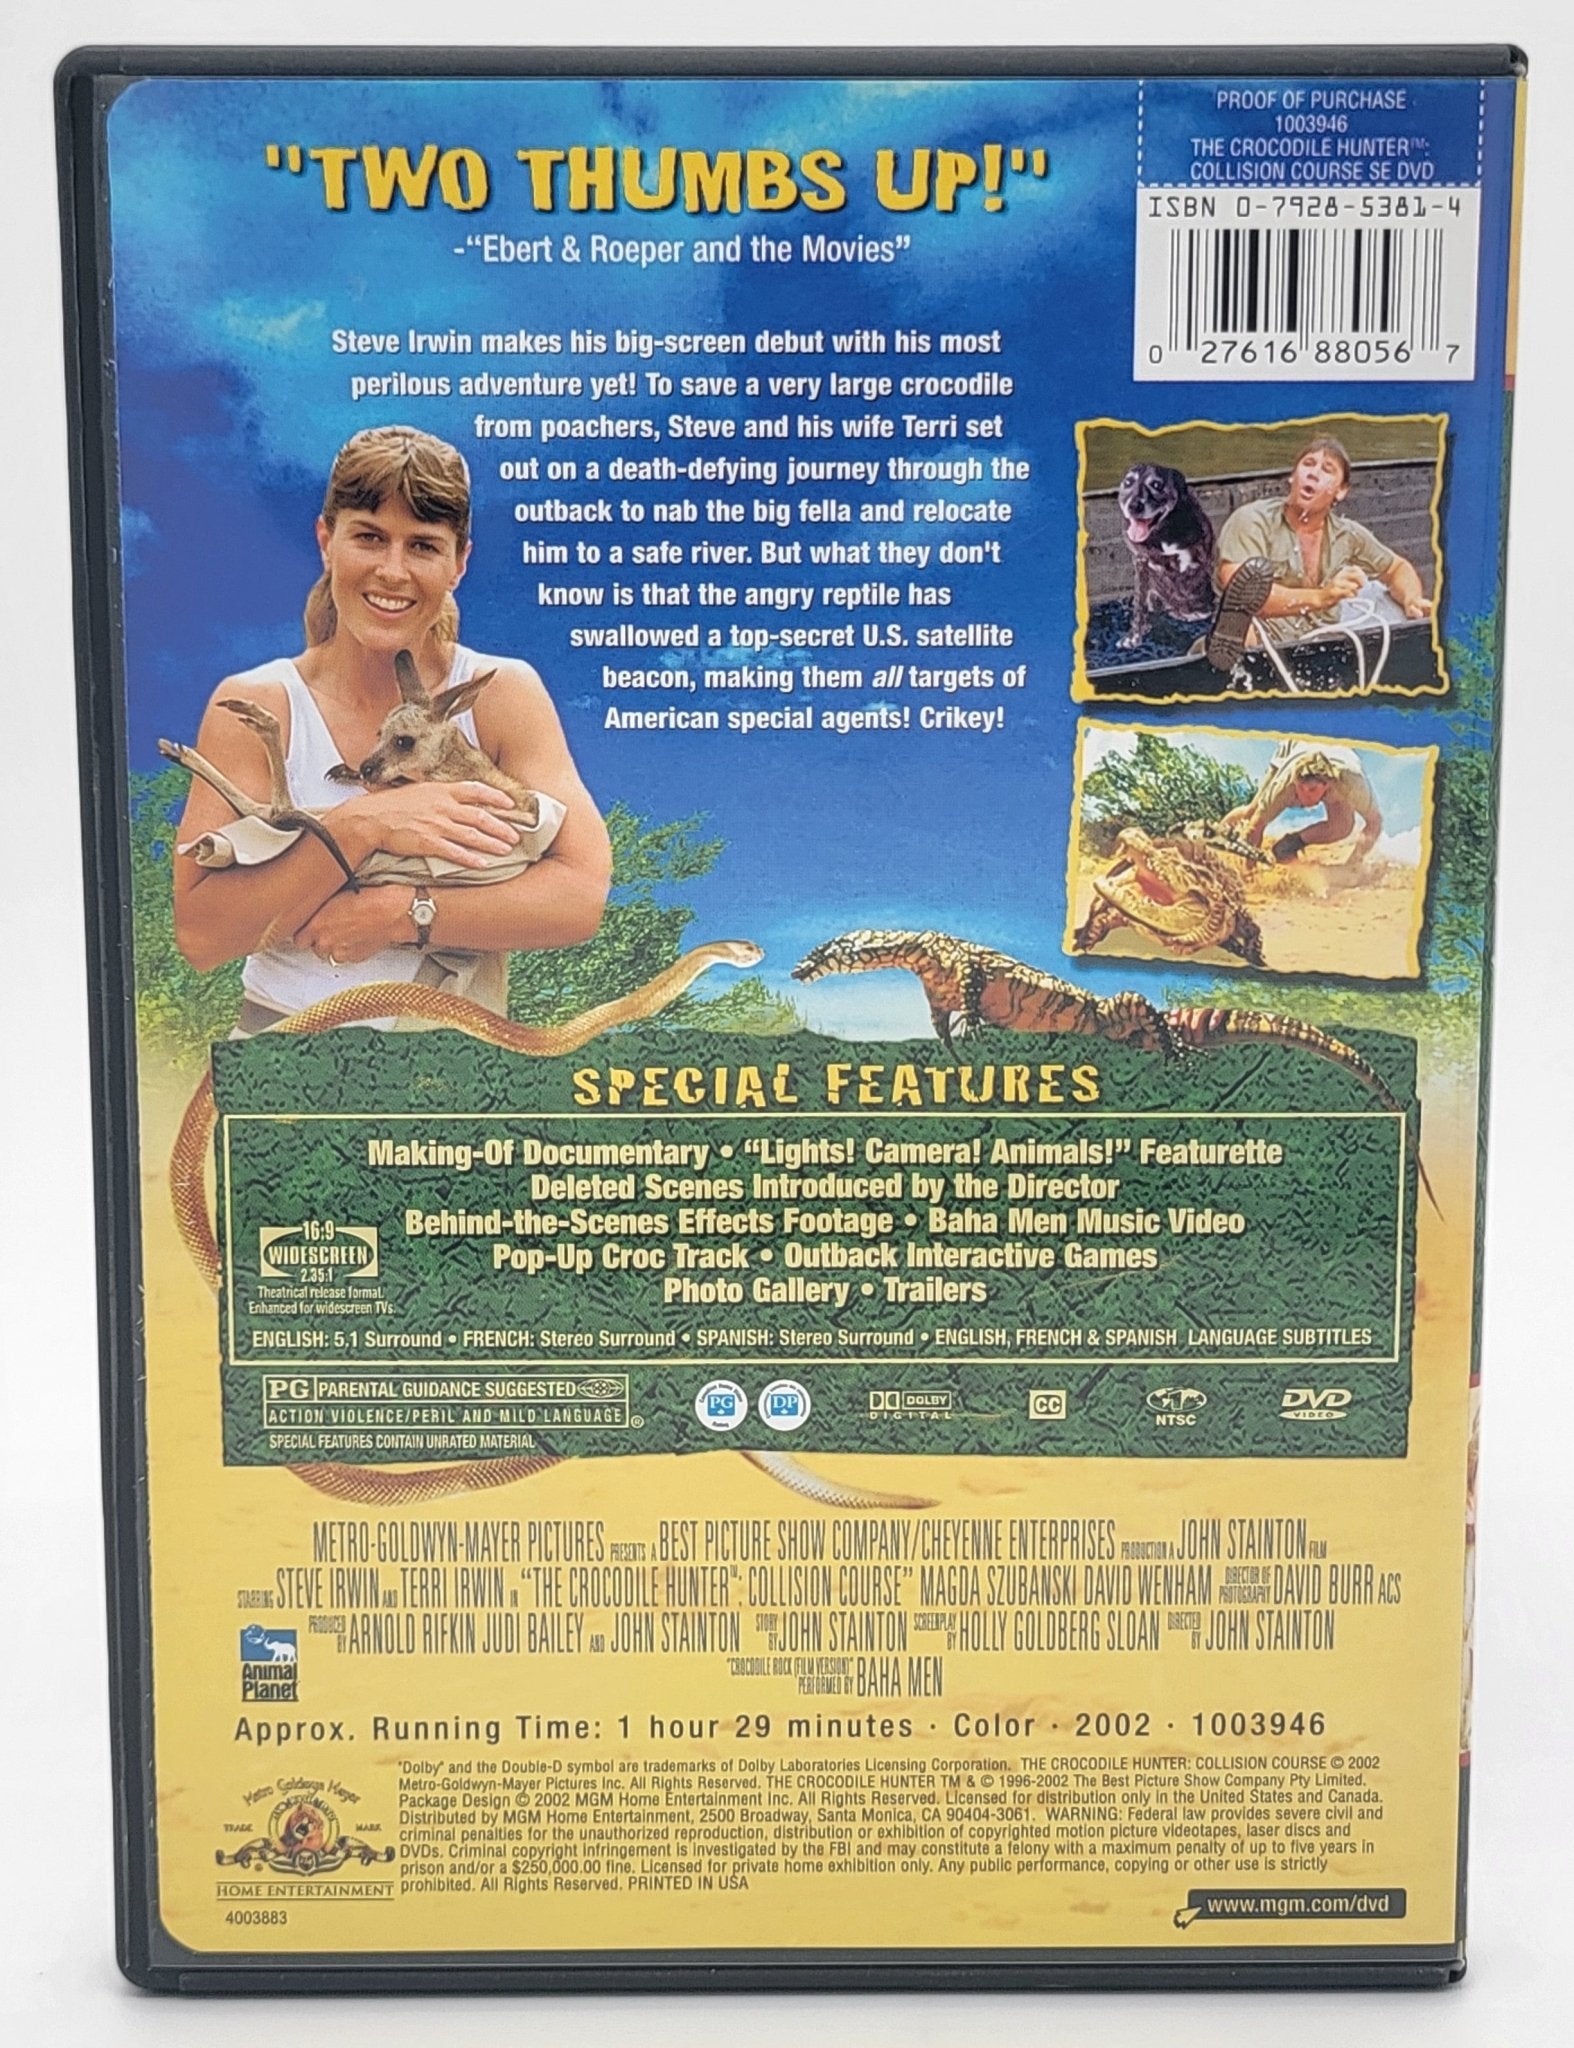 Sandpiper Pictures - The Crocodile Hunter - Collision Course | DVD | Special Edition | Widescreen - DVD - Steady Bunny Shop